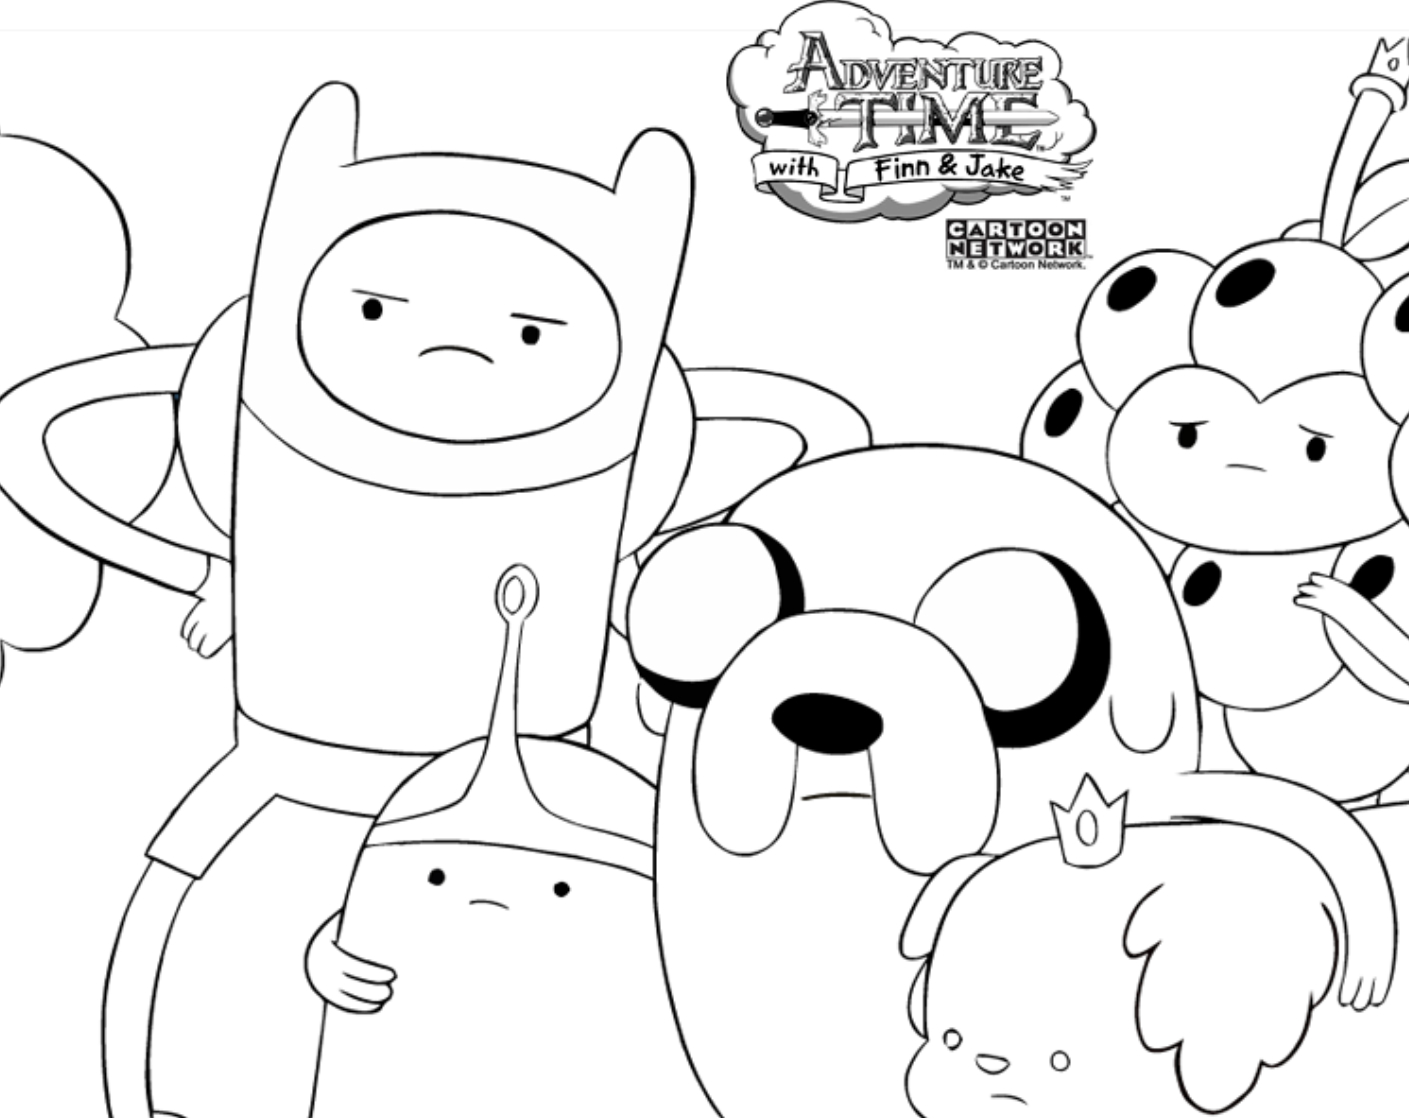 Cartoon Network Coloring Pages To Print Coloring Ideas Coloring Page Adventure Time Pages Ideas